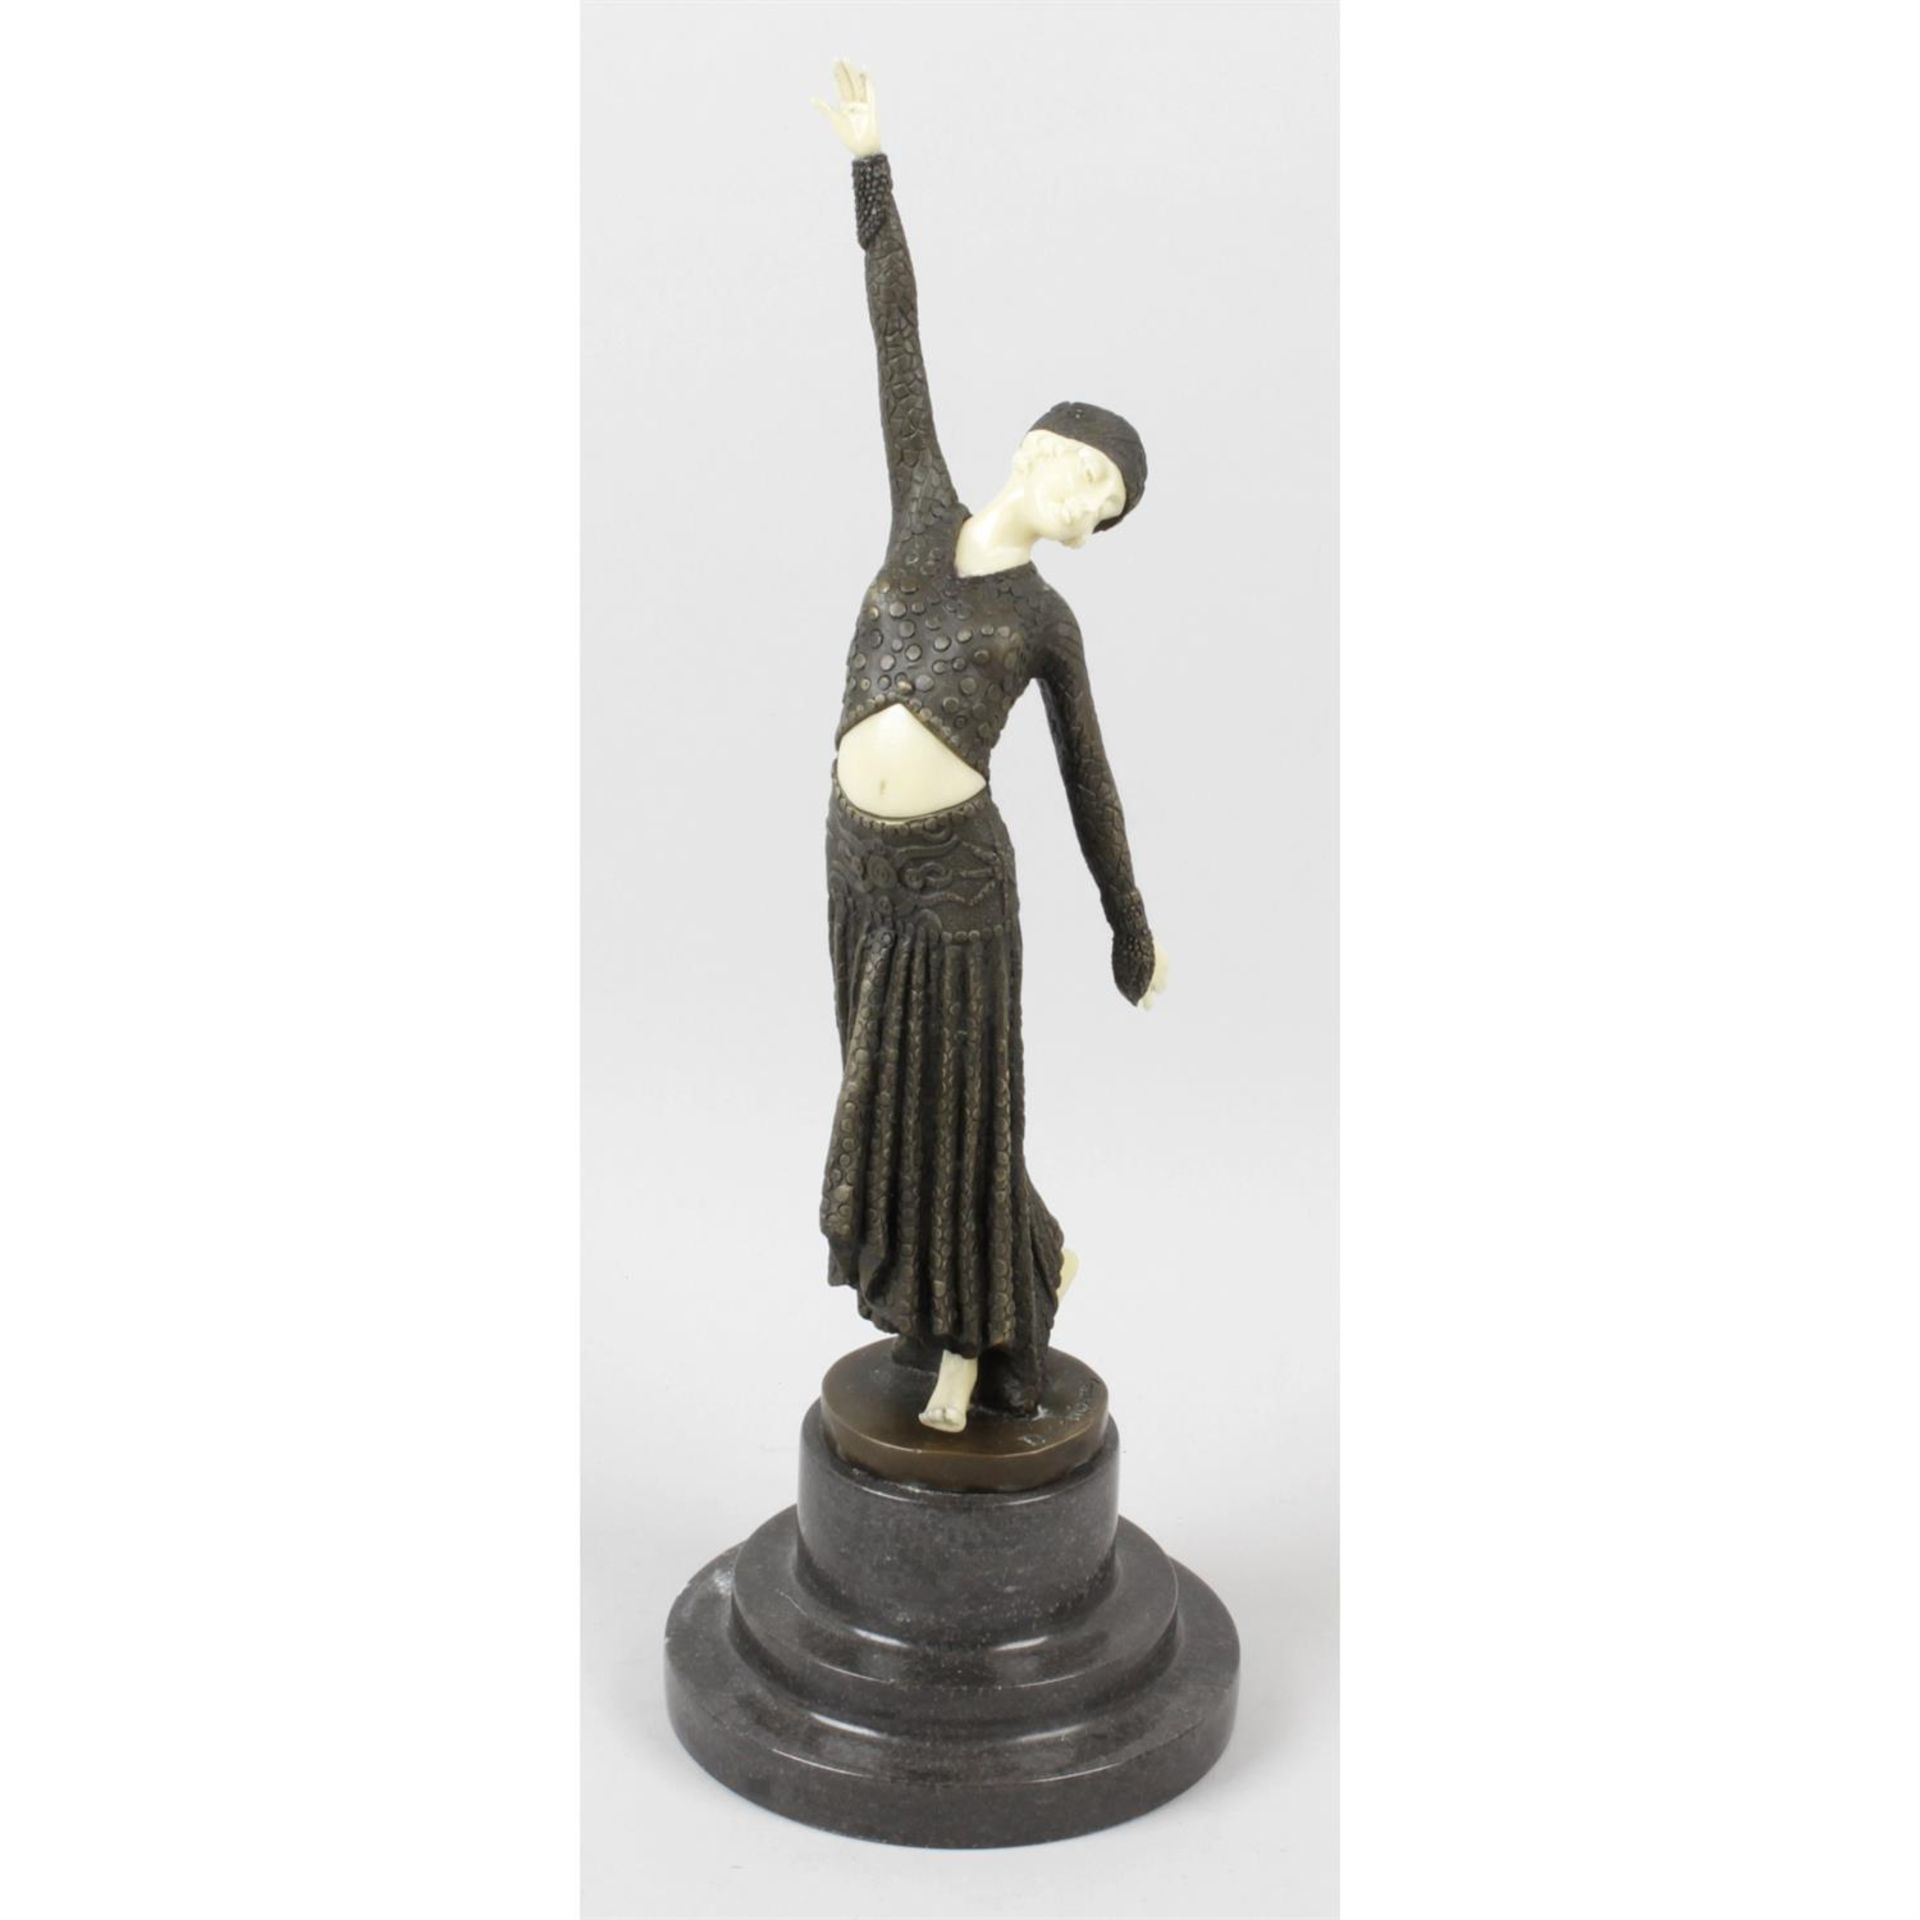 A reproduction bronze and resin figure modelled as a lady upon base.